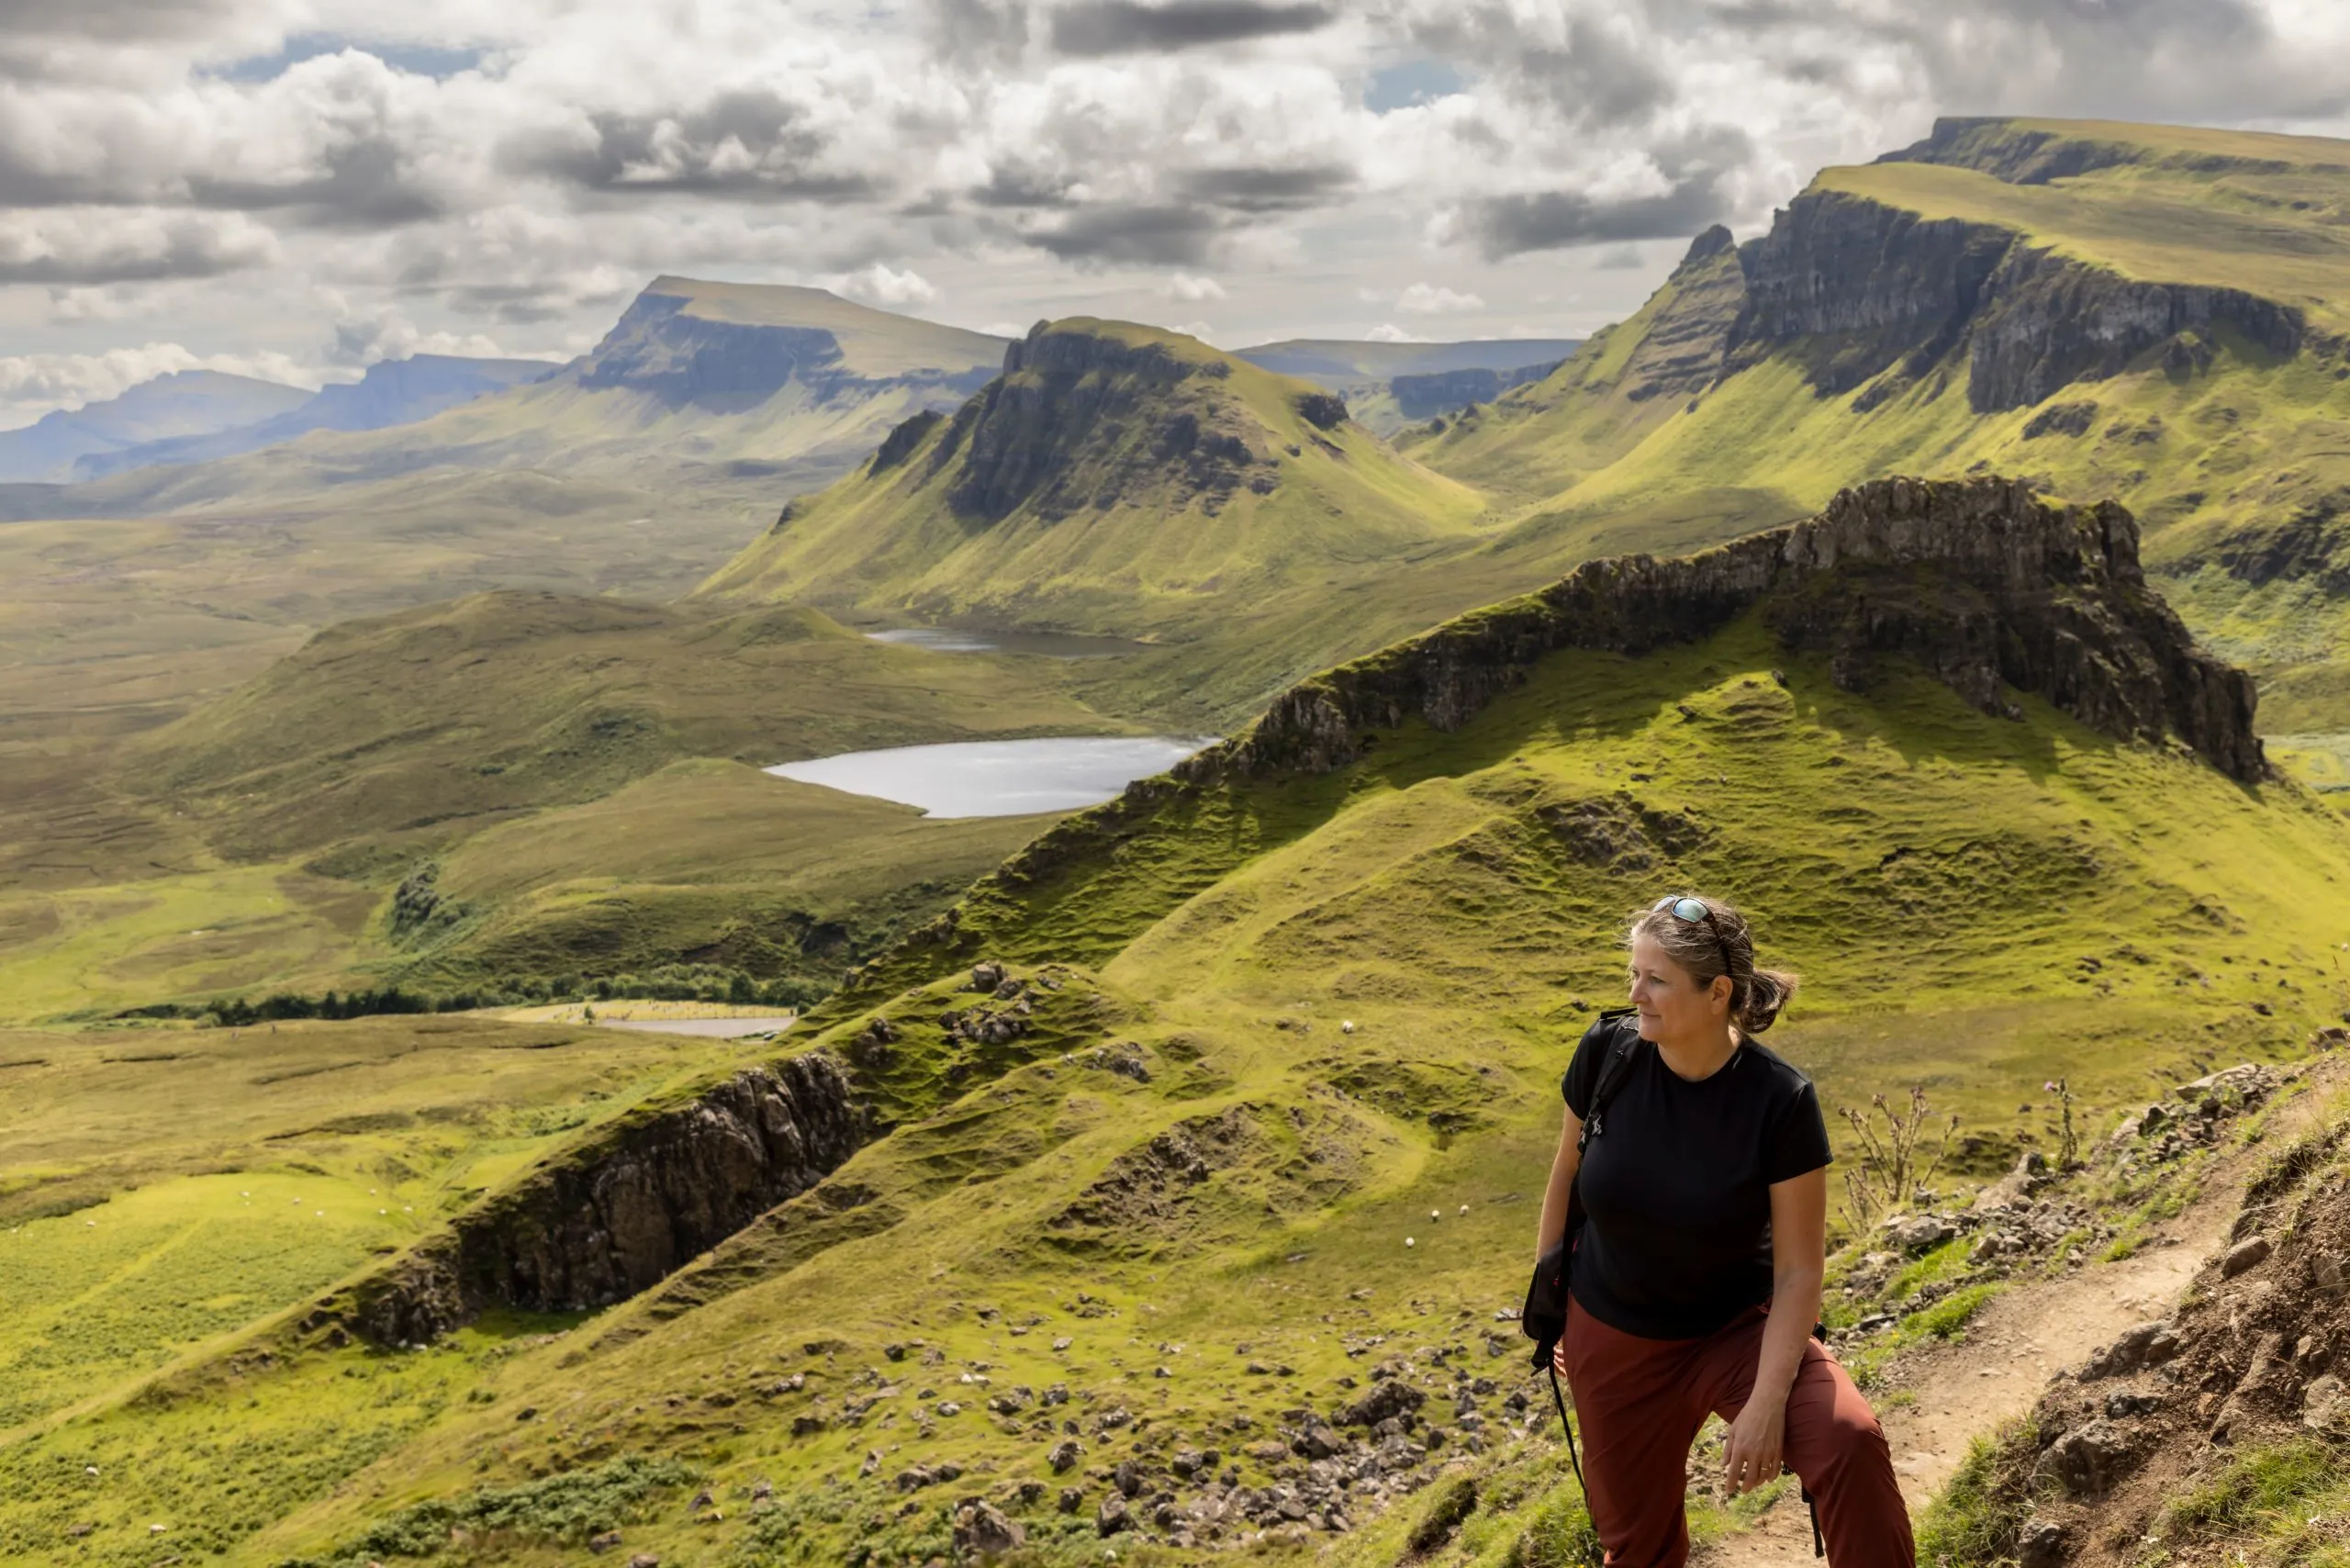 woman hiking on mountain range Quiraing. It is a geological formation on the Scottish Isle of Skye and a hiker's paradise